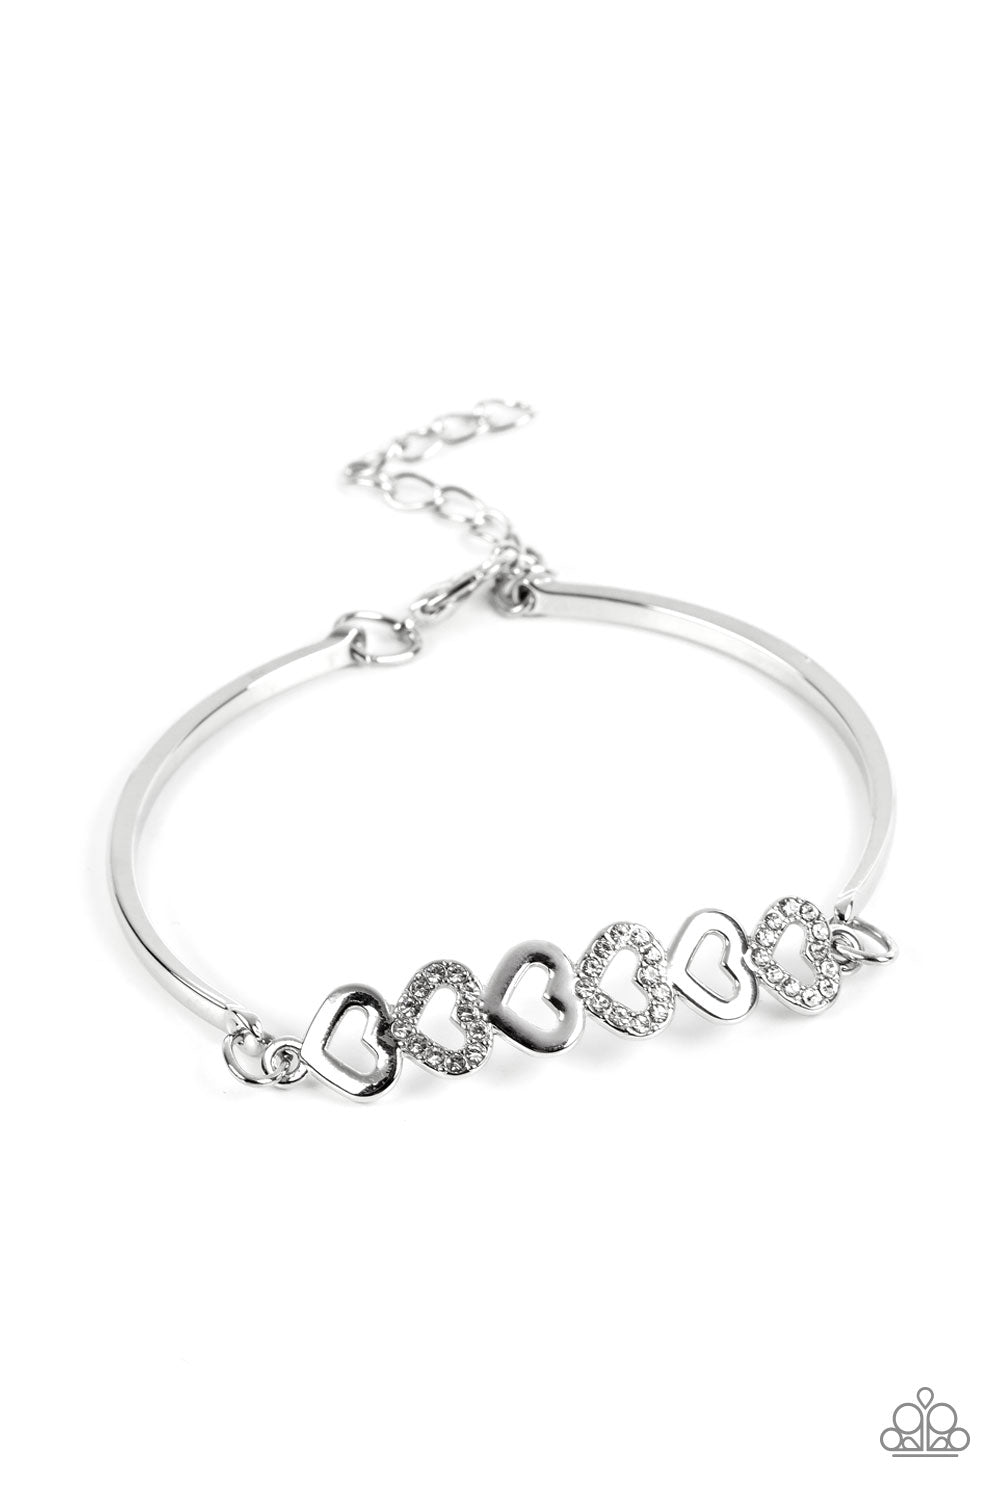 Attentive Admirer White Heart Bracelet - Paparazzi Accessories- lightbox - CarasShop.com - $5 Jewelry by Cara Jewels